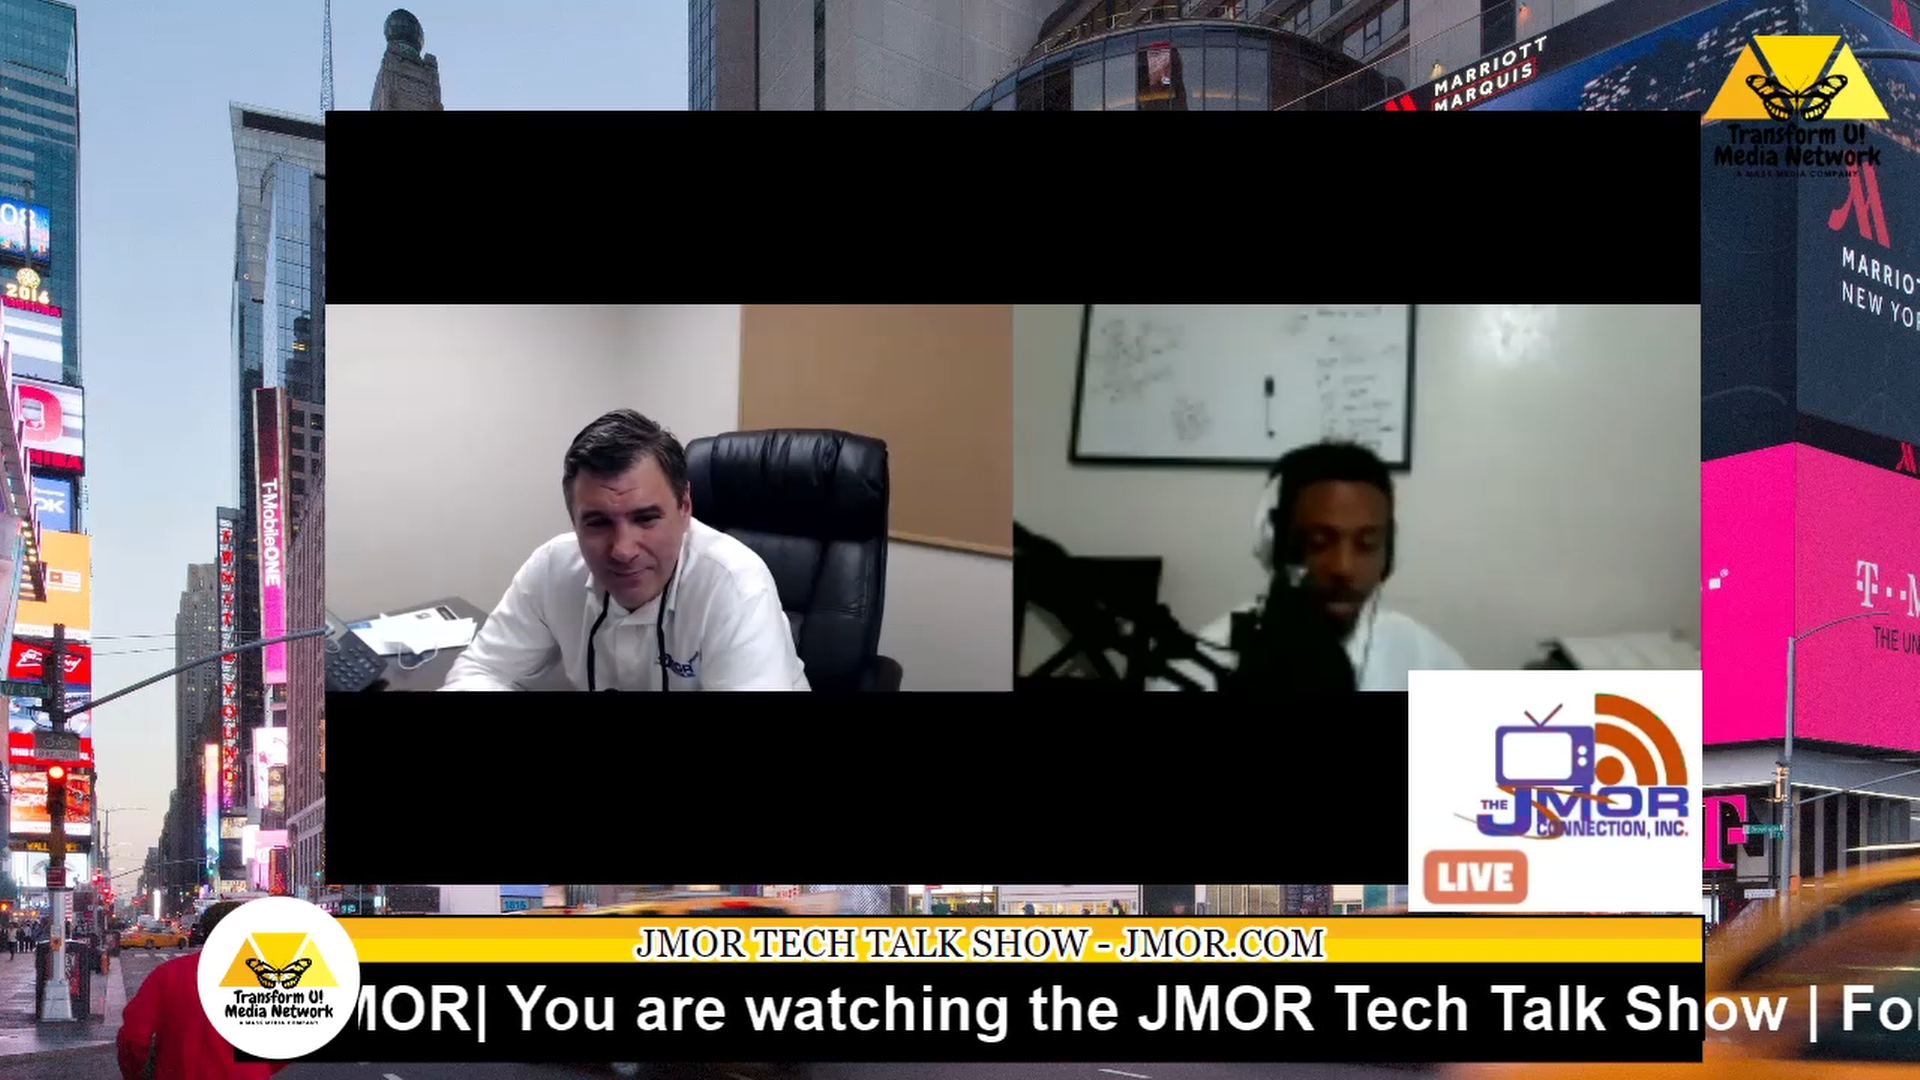 JMOR Tech Talk Show Aug 6, 2021:New 3D Athlete Tracking Technology Used in Olympic Games 2021